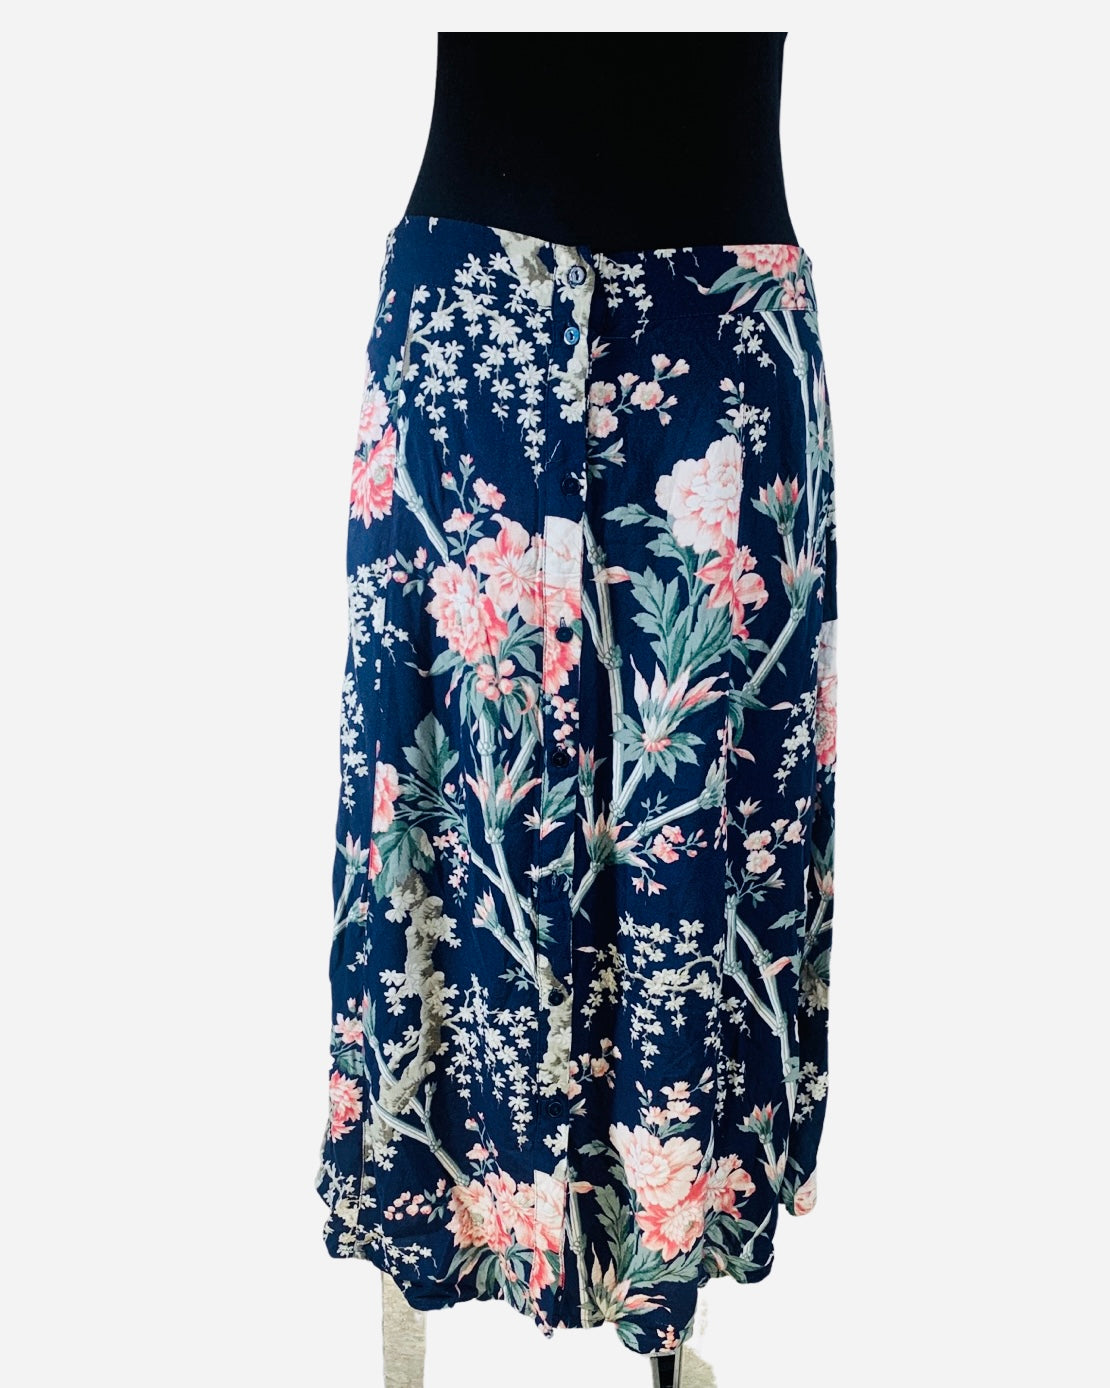 Wearhouse Ankle Length Floral Skirt Size 14